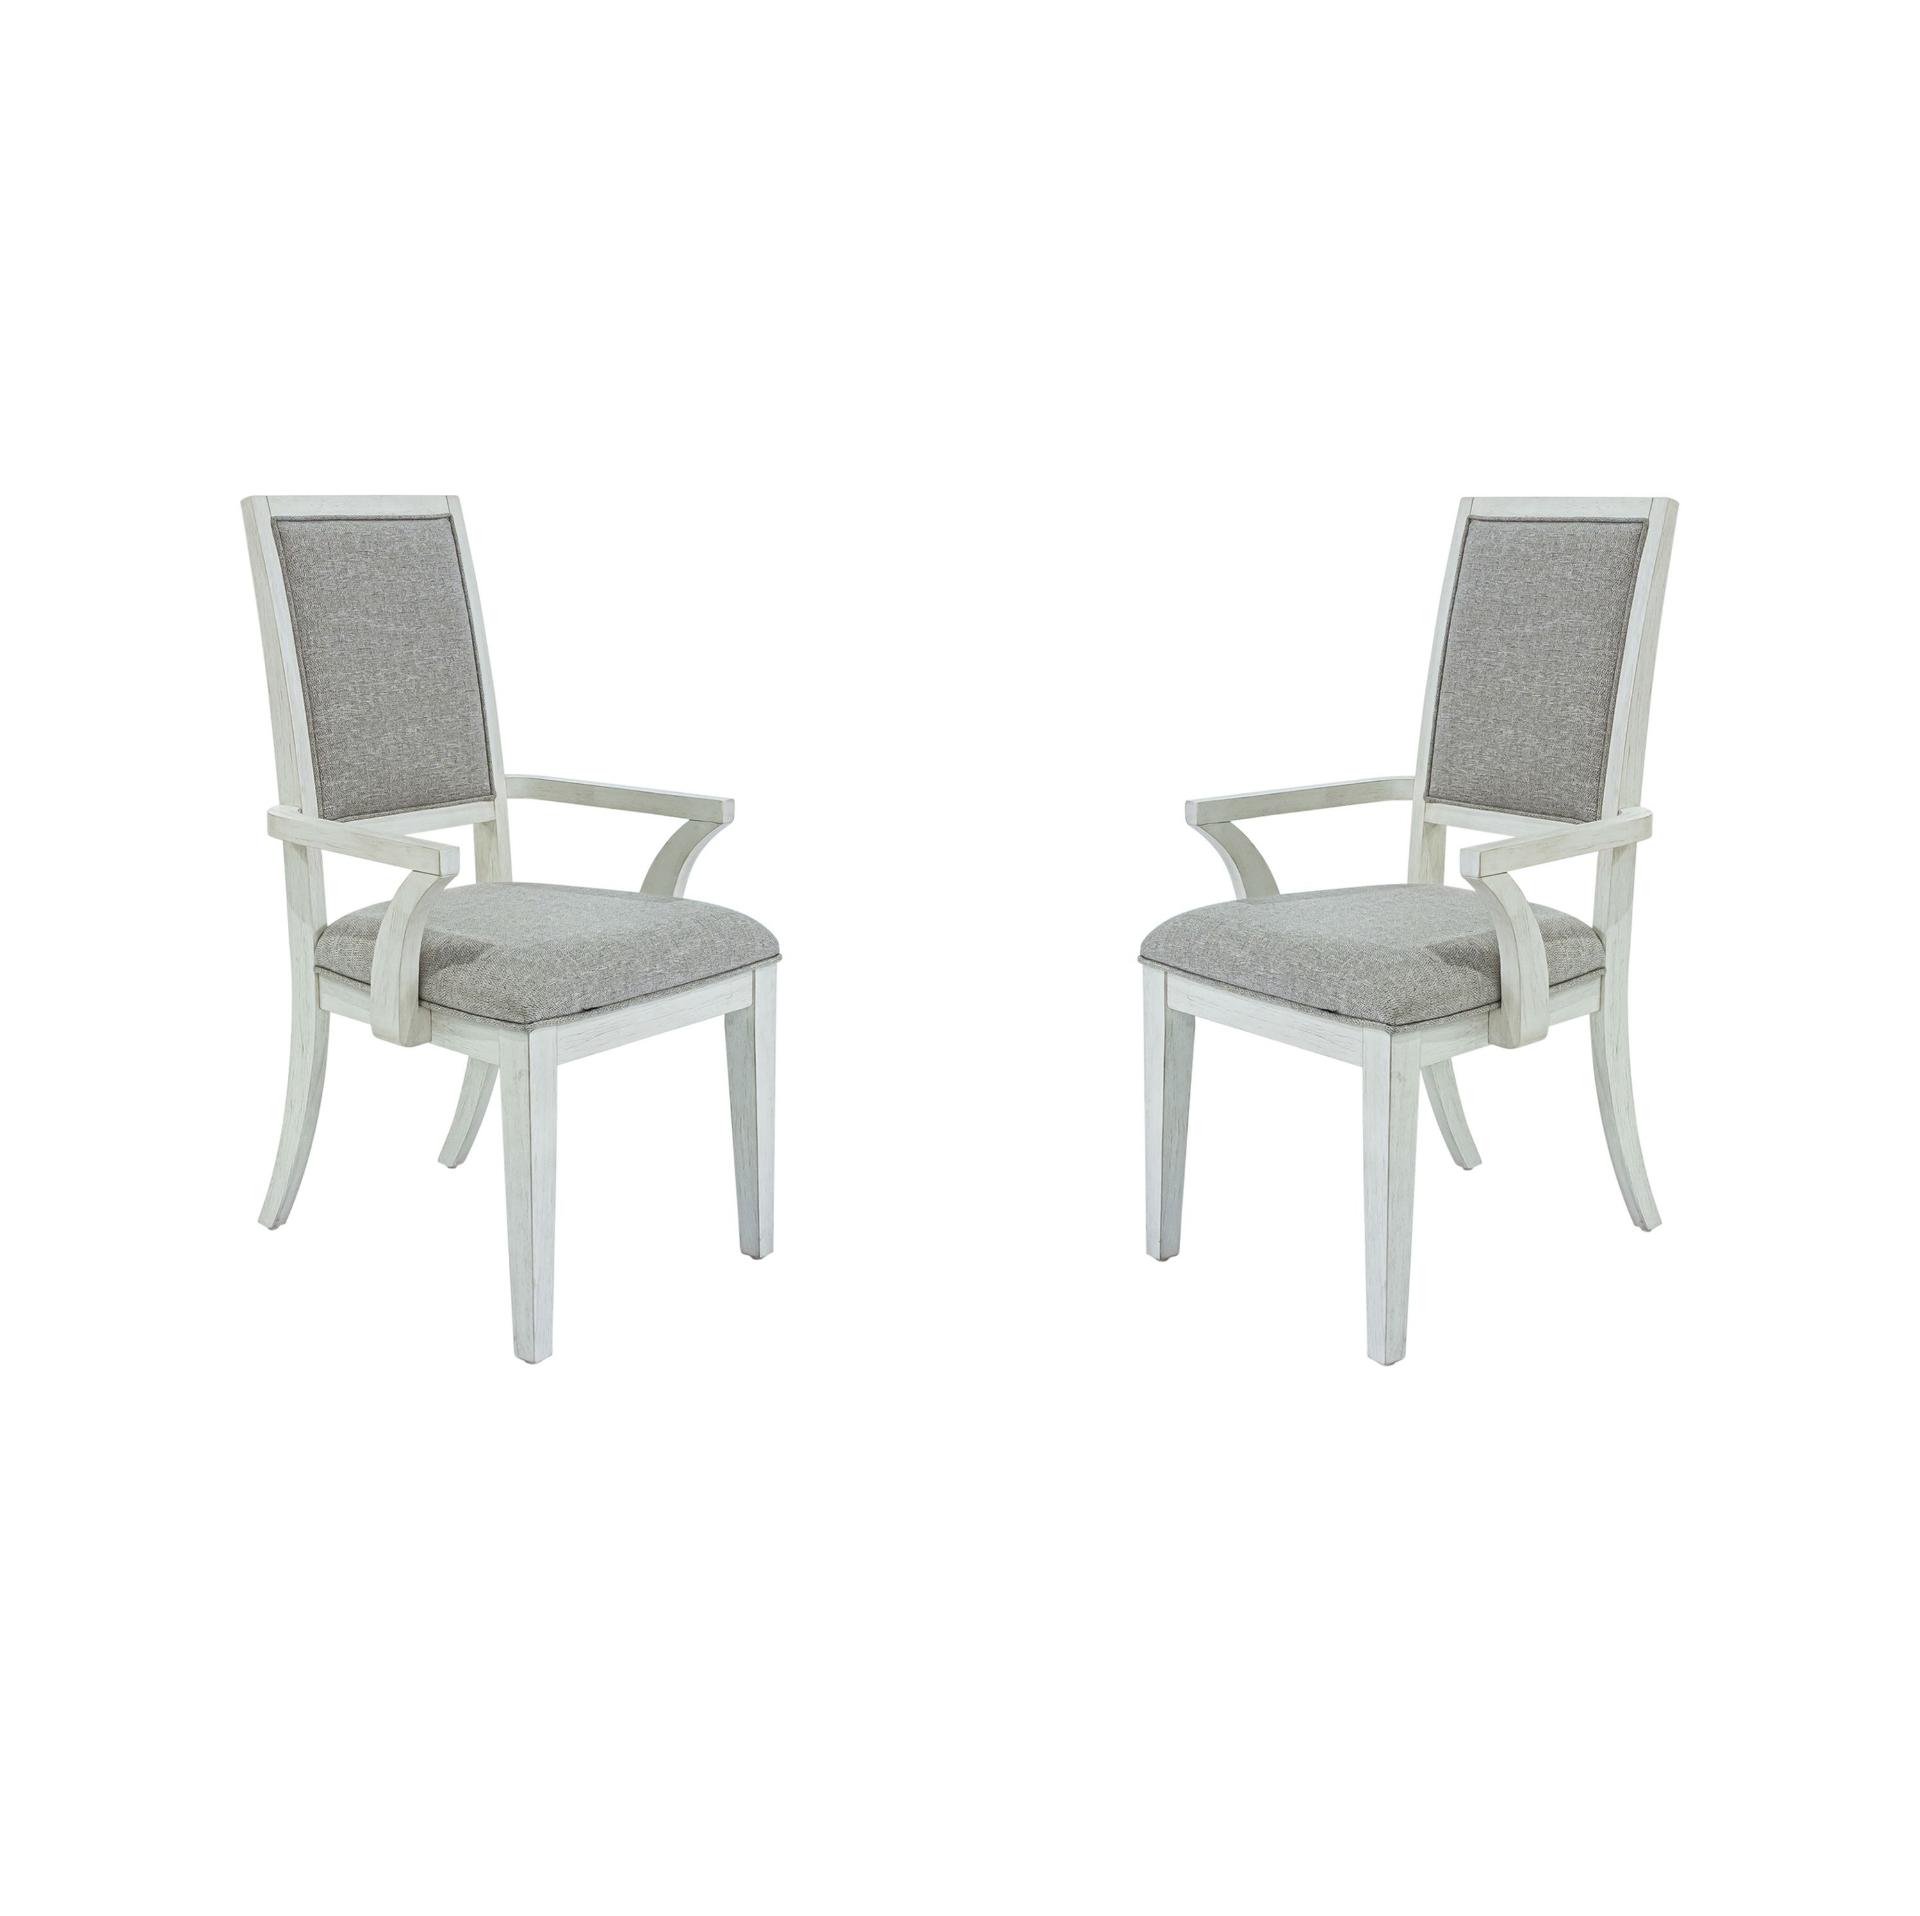 Liberty Furniture Mirage (946-DR) Dining Chair Set